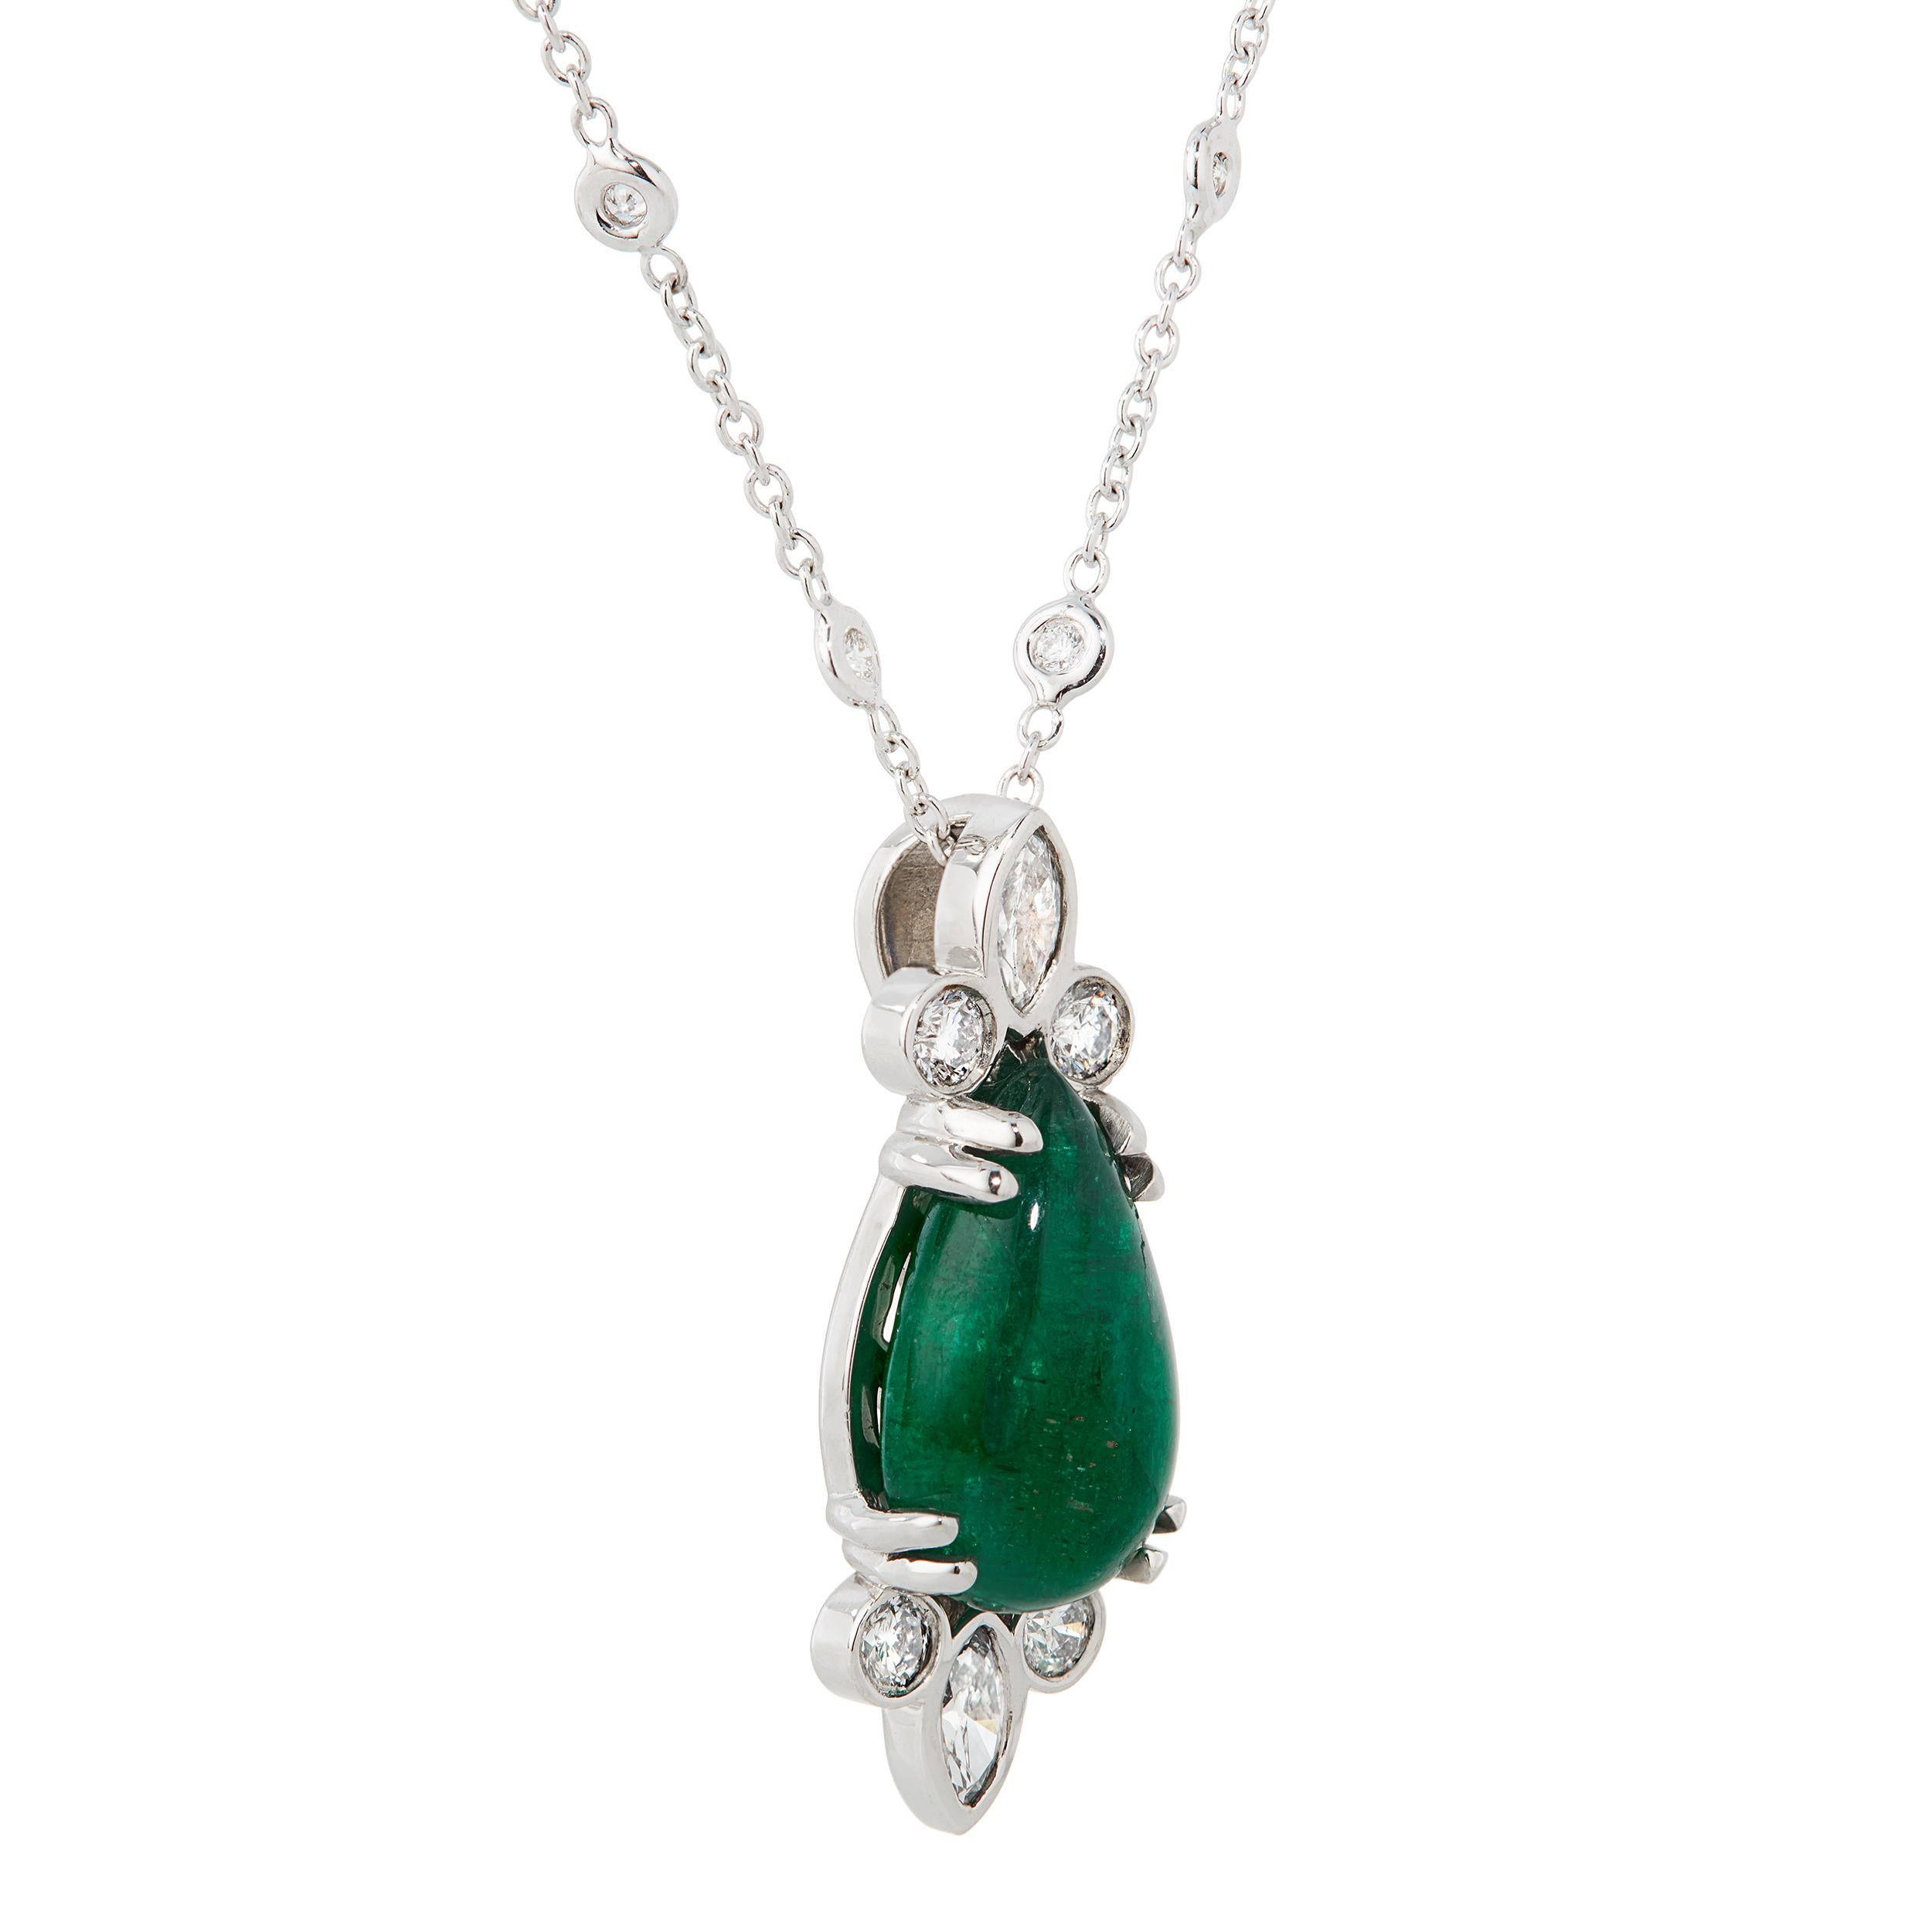 This set of smooth Cabochon Zambian Emeralds accented by diamonds is classic. Suitable for any occasion.

Pendant Measurements
Height 26.53 mm
Width 9.30 mm

Pendant Detail
Pear-shaped Emerald Cabochon 4.71 Carats
8 Diamonds 0.84 Carats
Set in